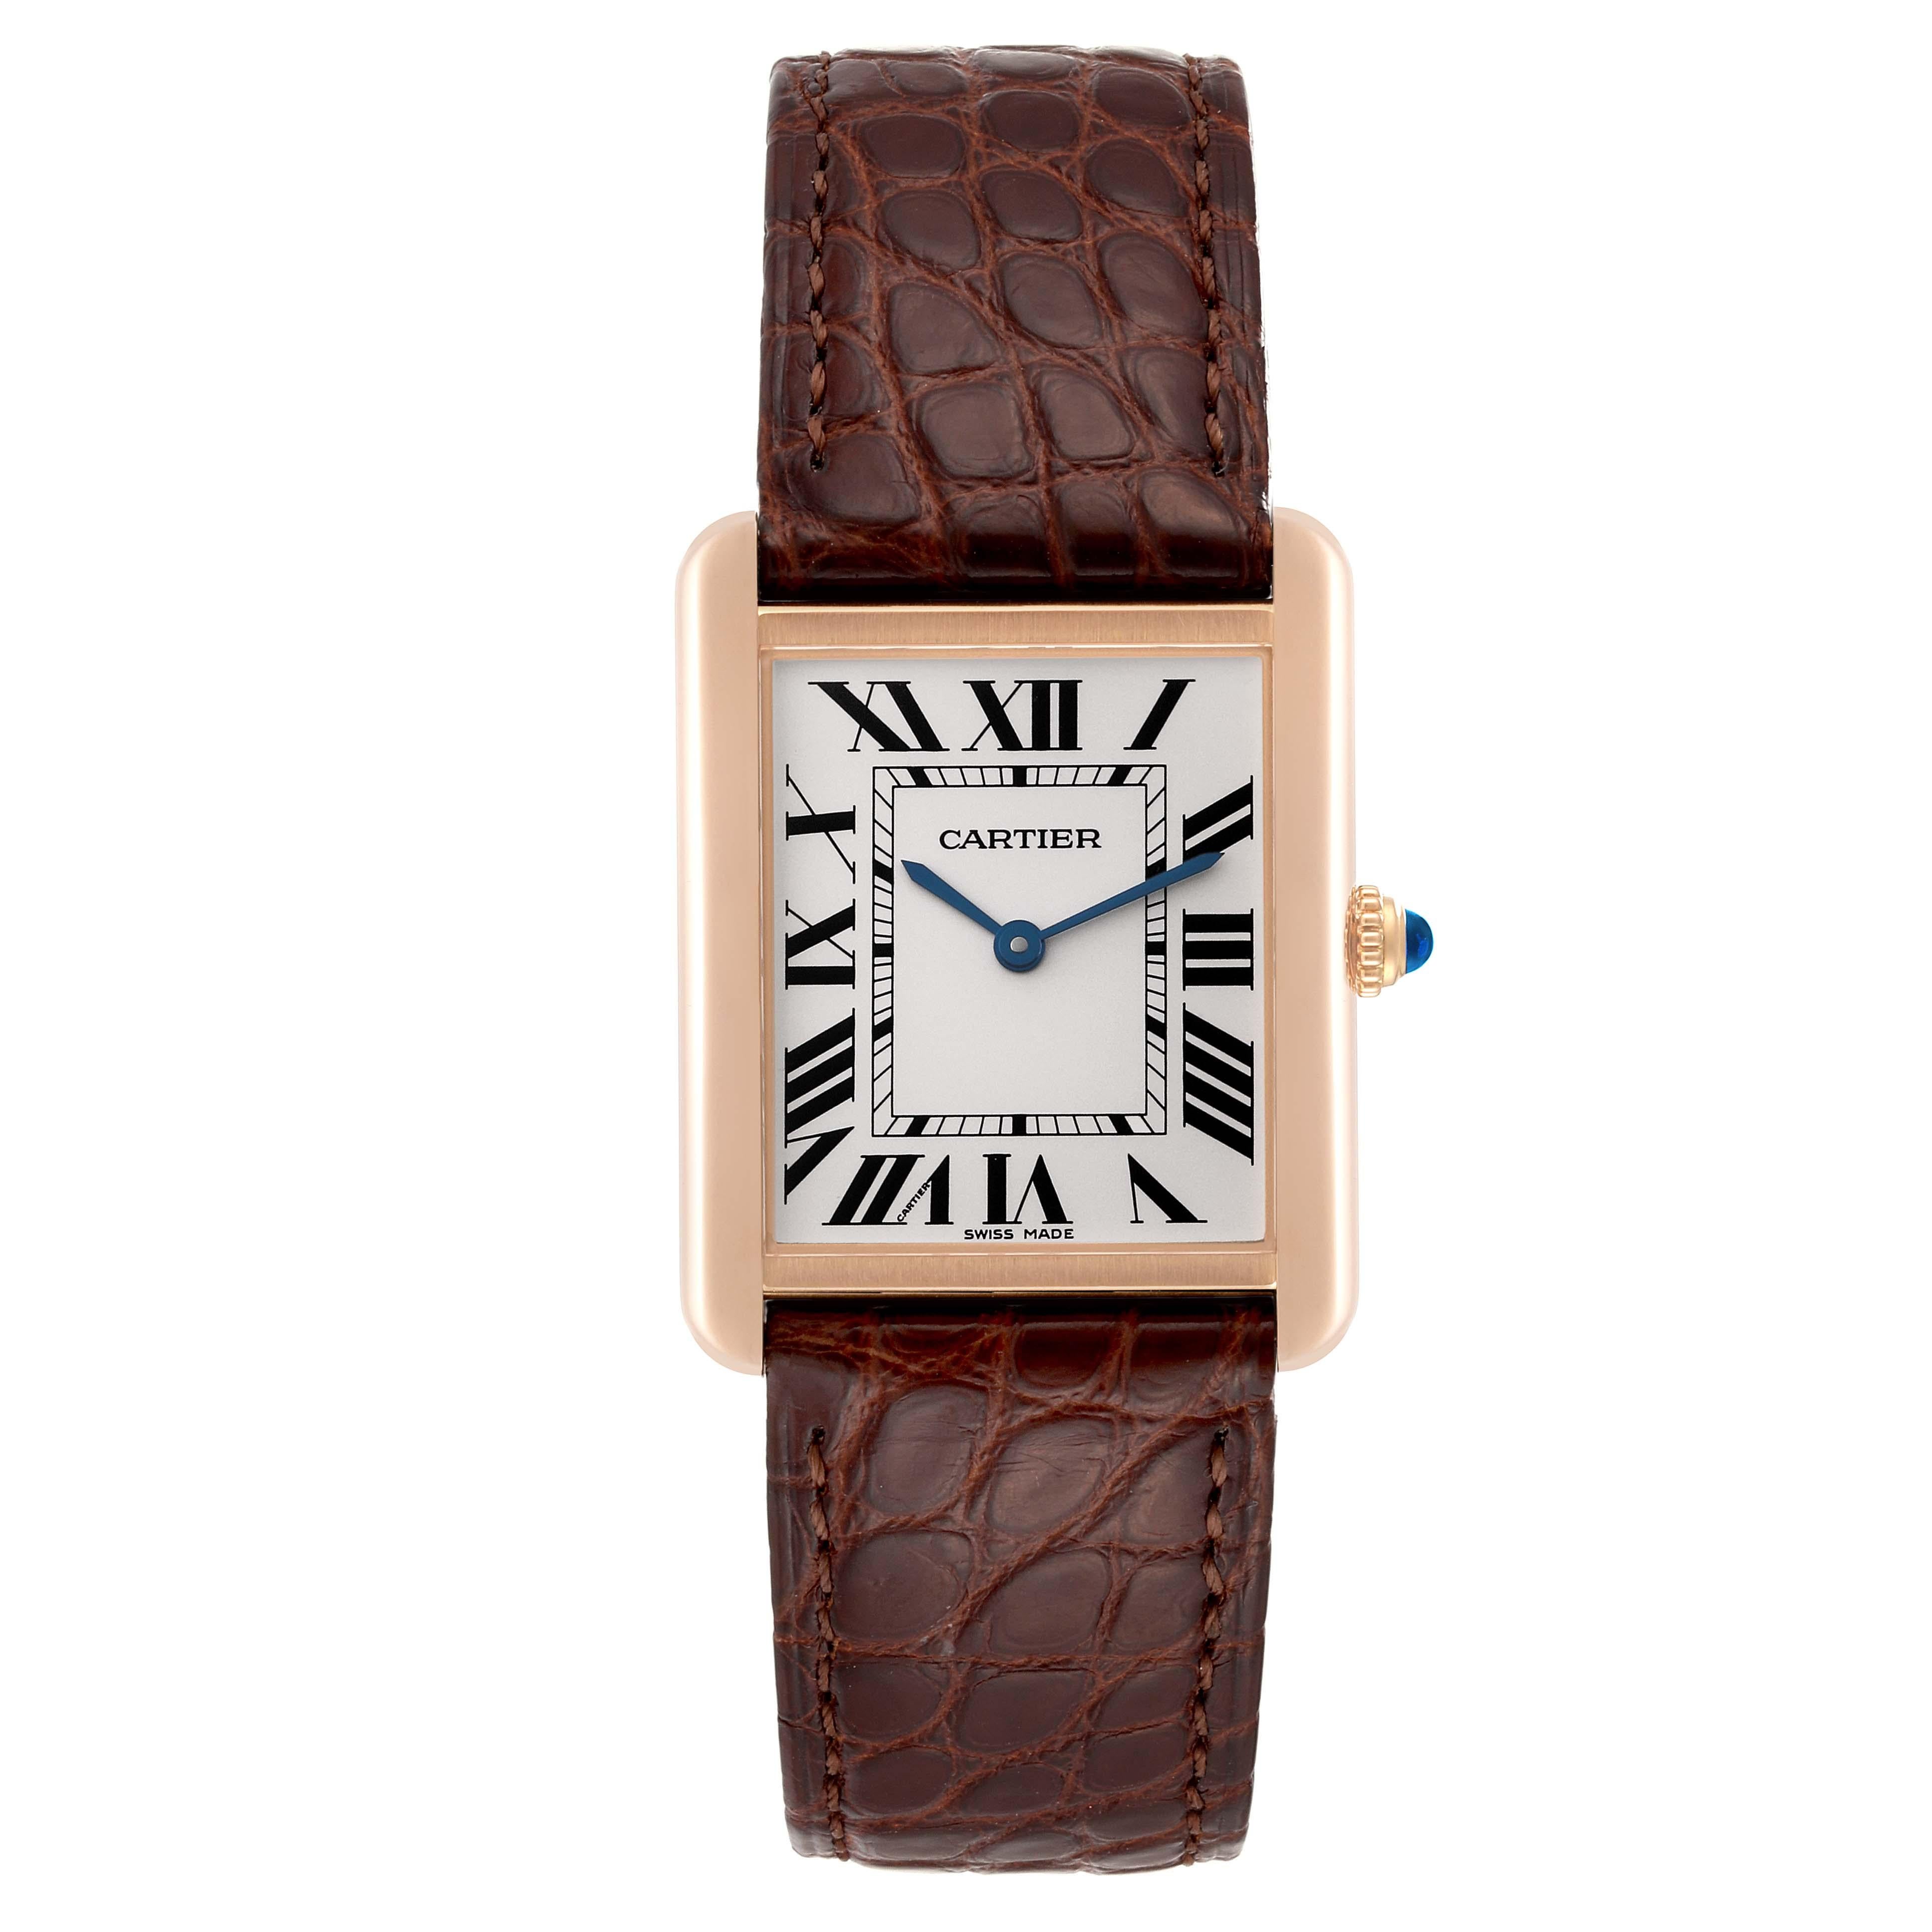 Cartier Tank Solo Large Rose Gold Steel Brown Strap Mens Watch W5200025 Card. Quartz movement. 18k rose gold case 34.0 x 27.0 mm. Stainless steel caseback. Circular grained crown set with a blue spinel cabochon. . Scratch resistant sapphire crystal.